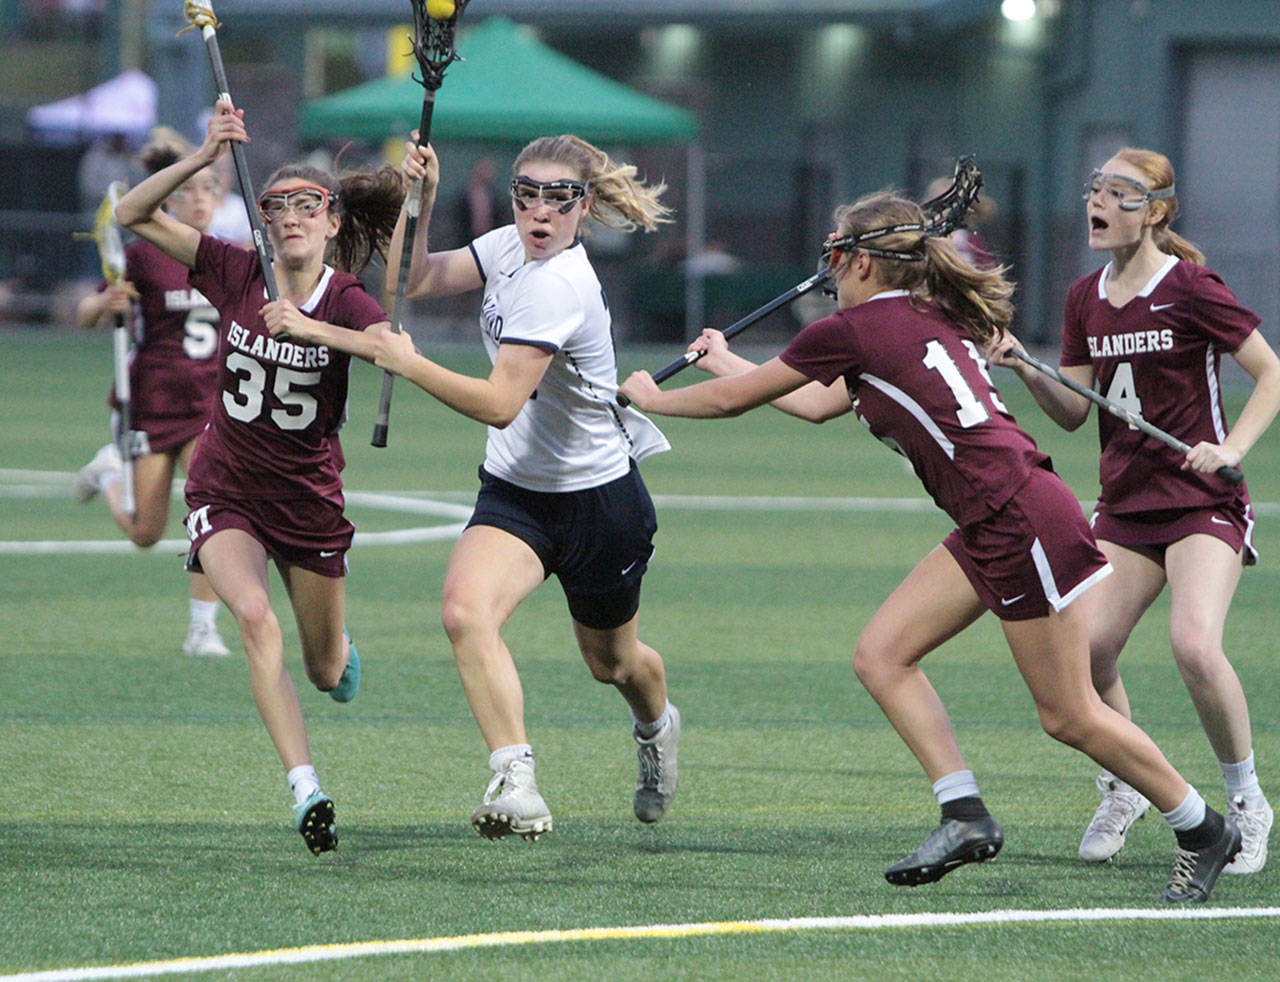 Mackenzie Chapman attacks the Mercer Island goal during first-half action in the Washington state girls lacrosse championship game. (Brian Kelly | Bainbridge Island Review)